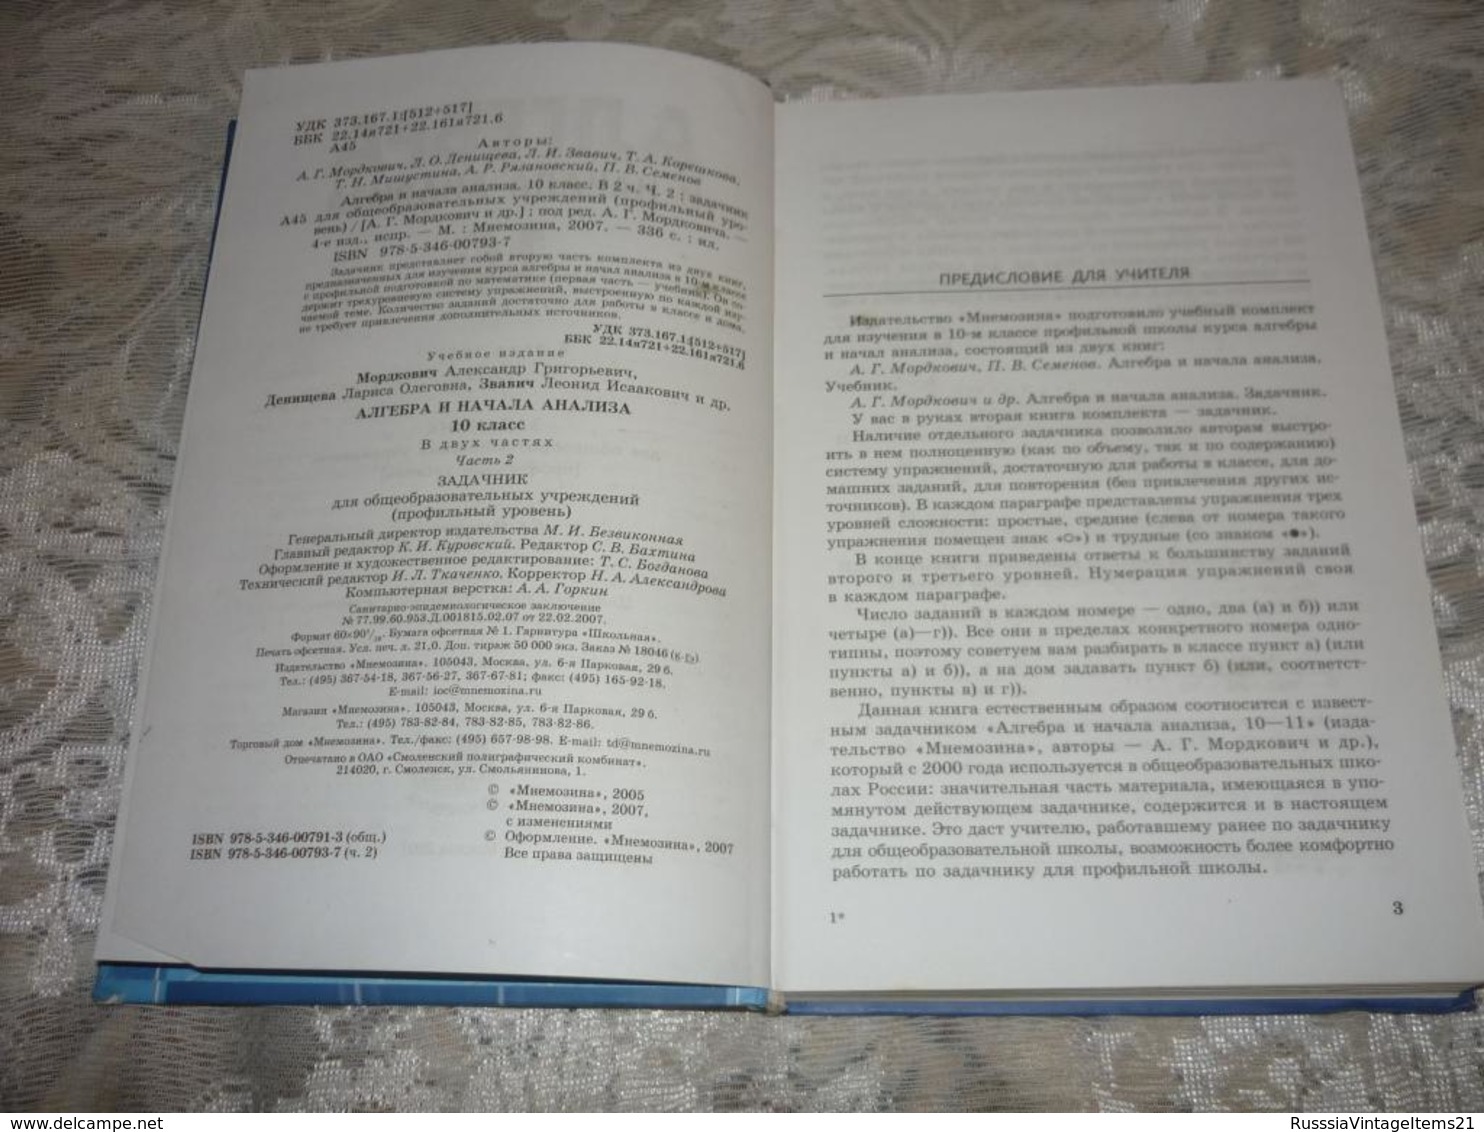 Russian Textbook - In Russian - Textbook From Russia - Mordkovich A. Algebra And The Beginning Of The Analysis. Grade 10 - Lingue Slave